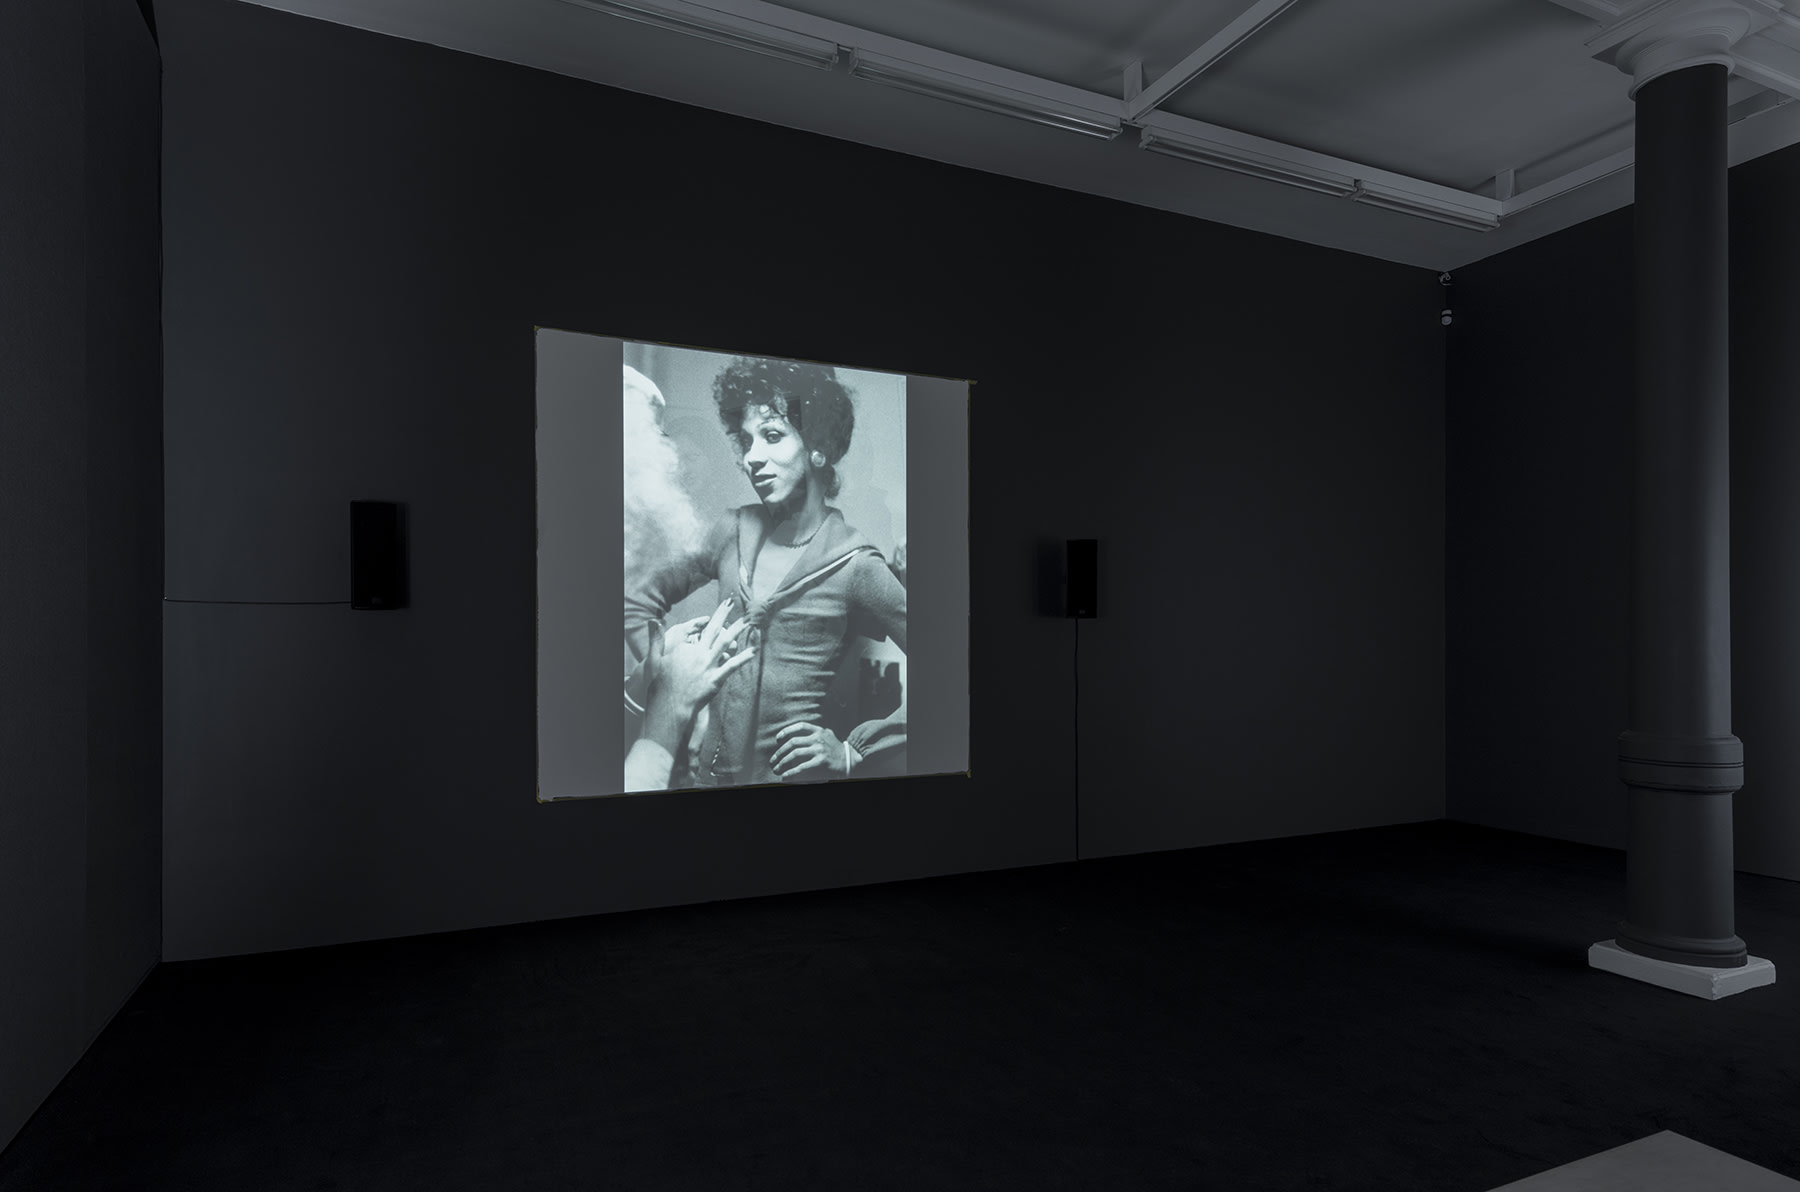 A black and white projection of 2 people talking, one with their back to the screen and the other with hands on their hips.